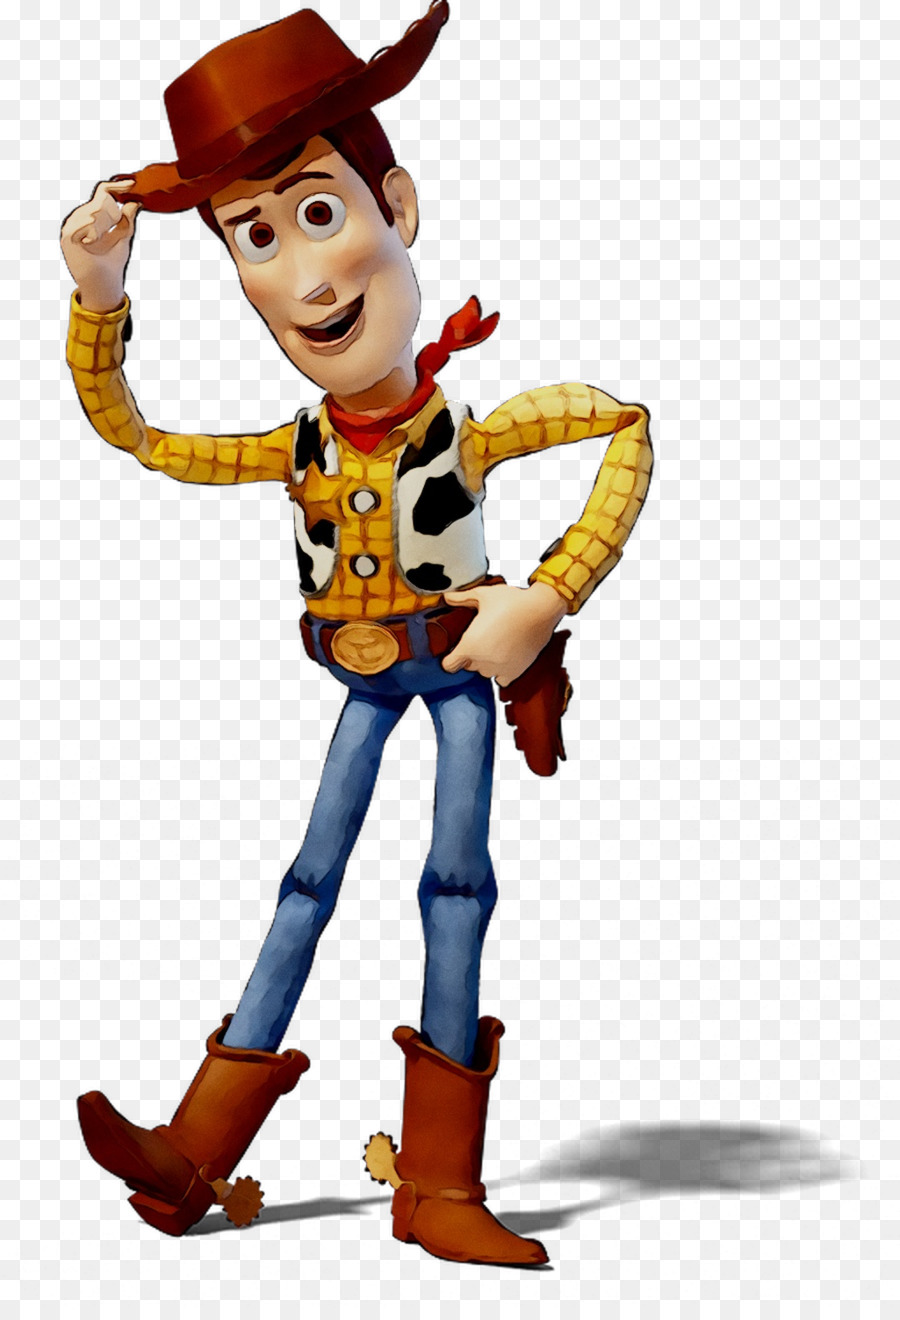 png download - 1025*1489 - Free Transparent Toy Story Sheriff Woody png